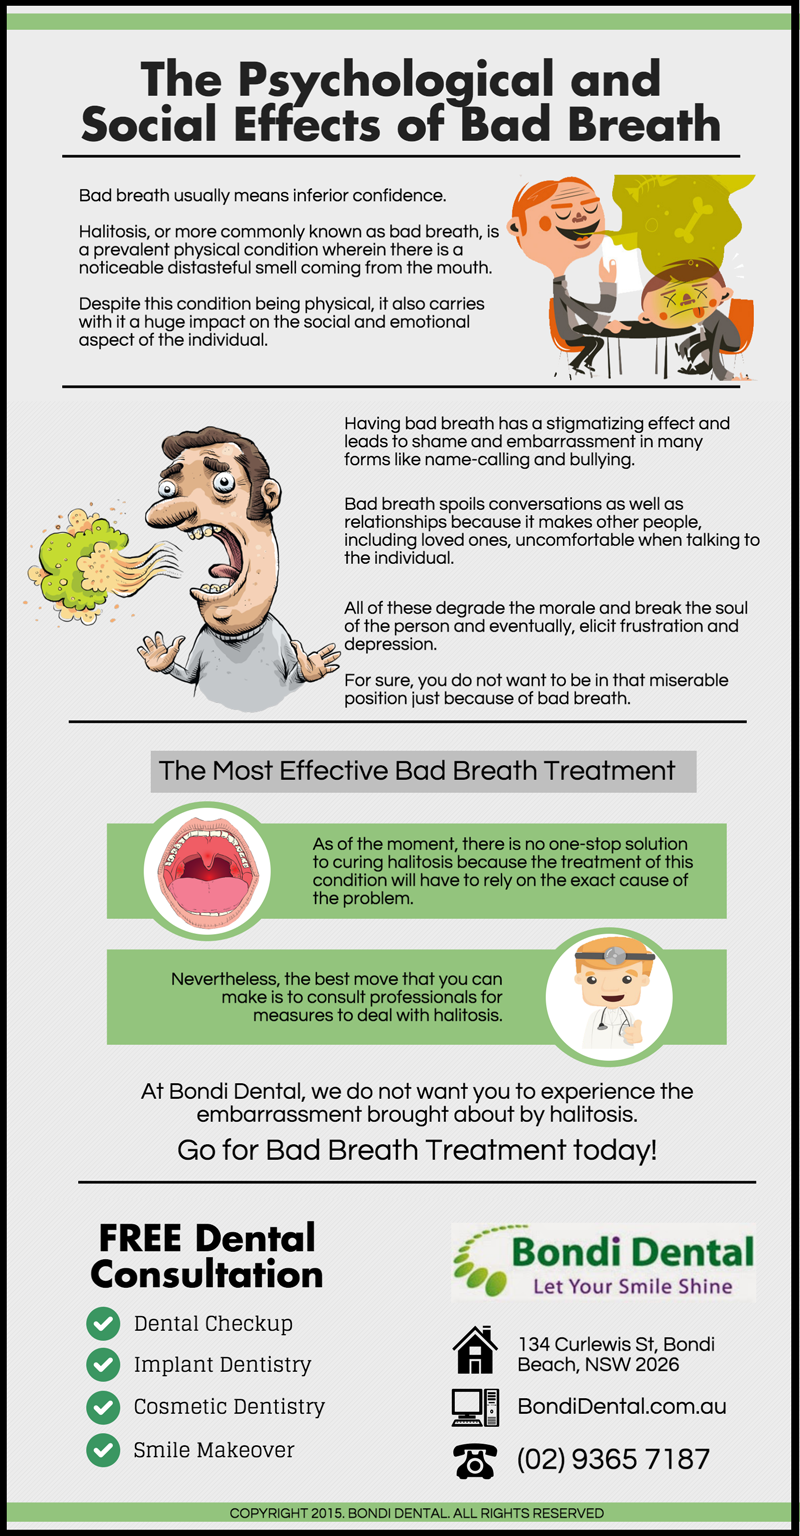 Meaning halitosis Bad breath